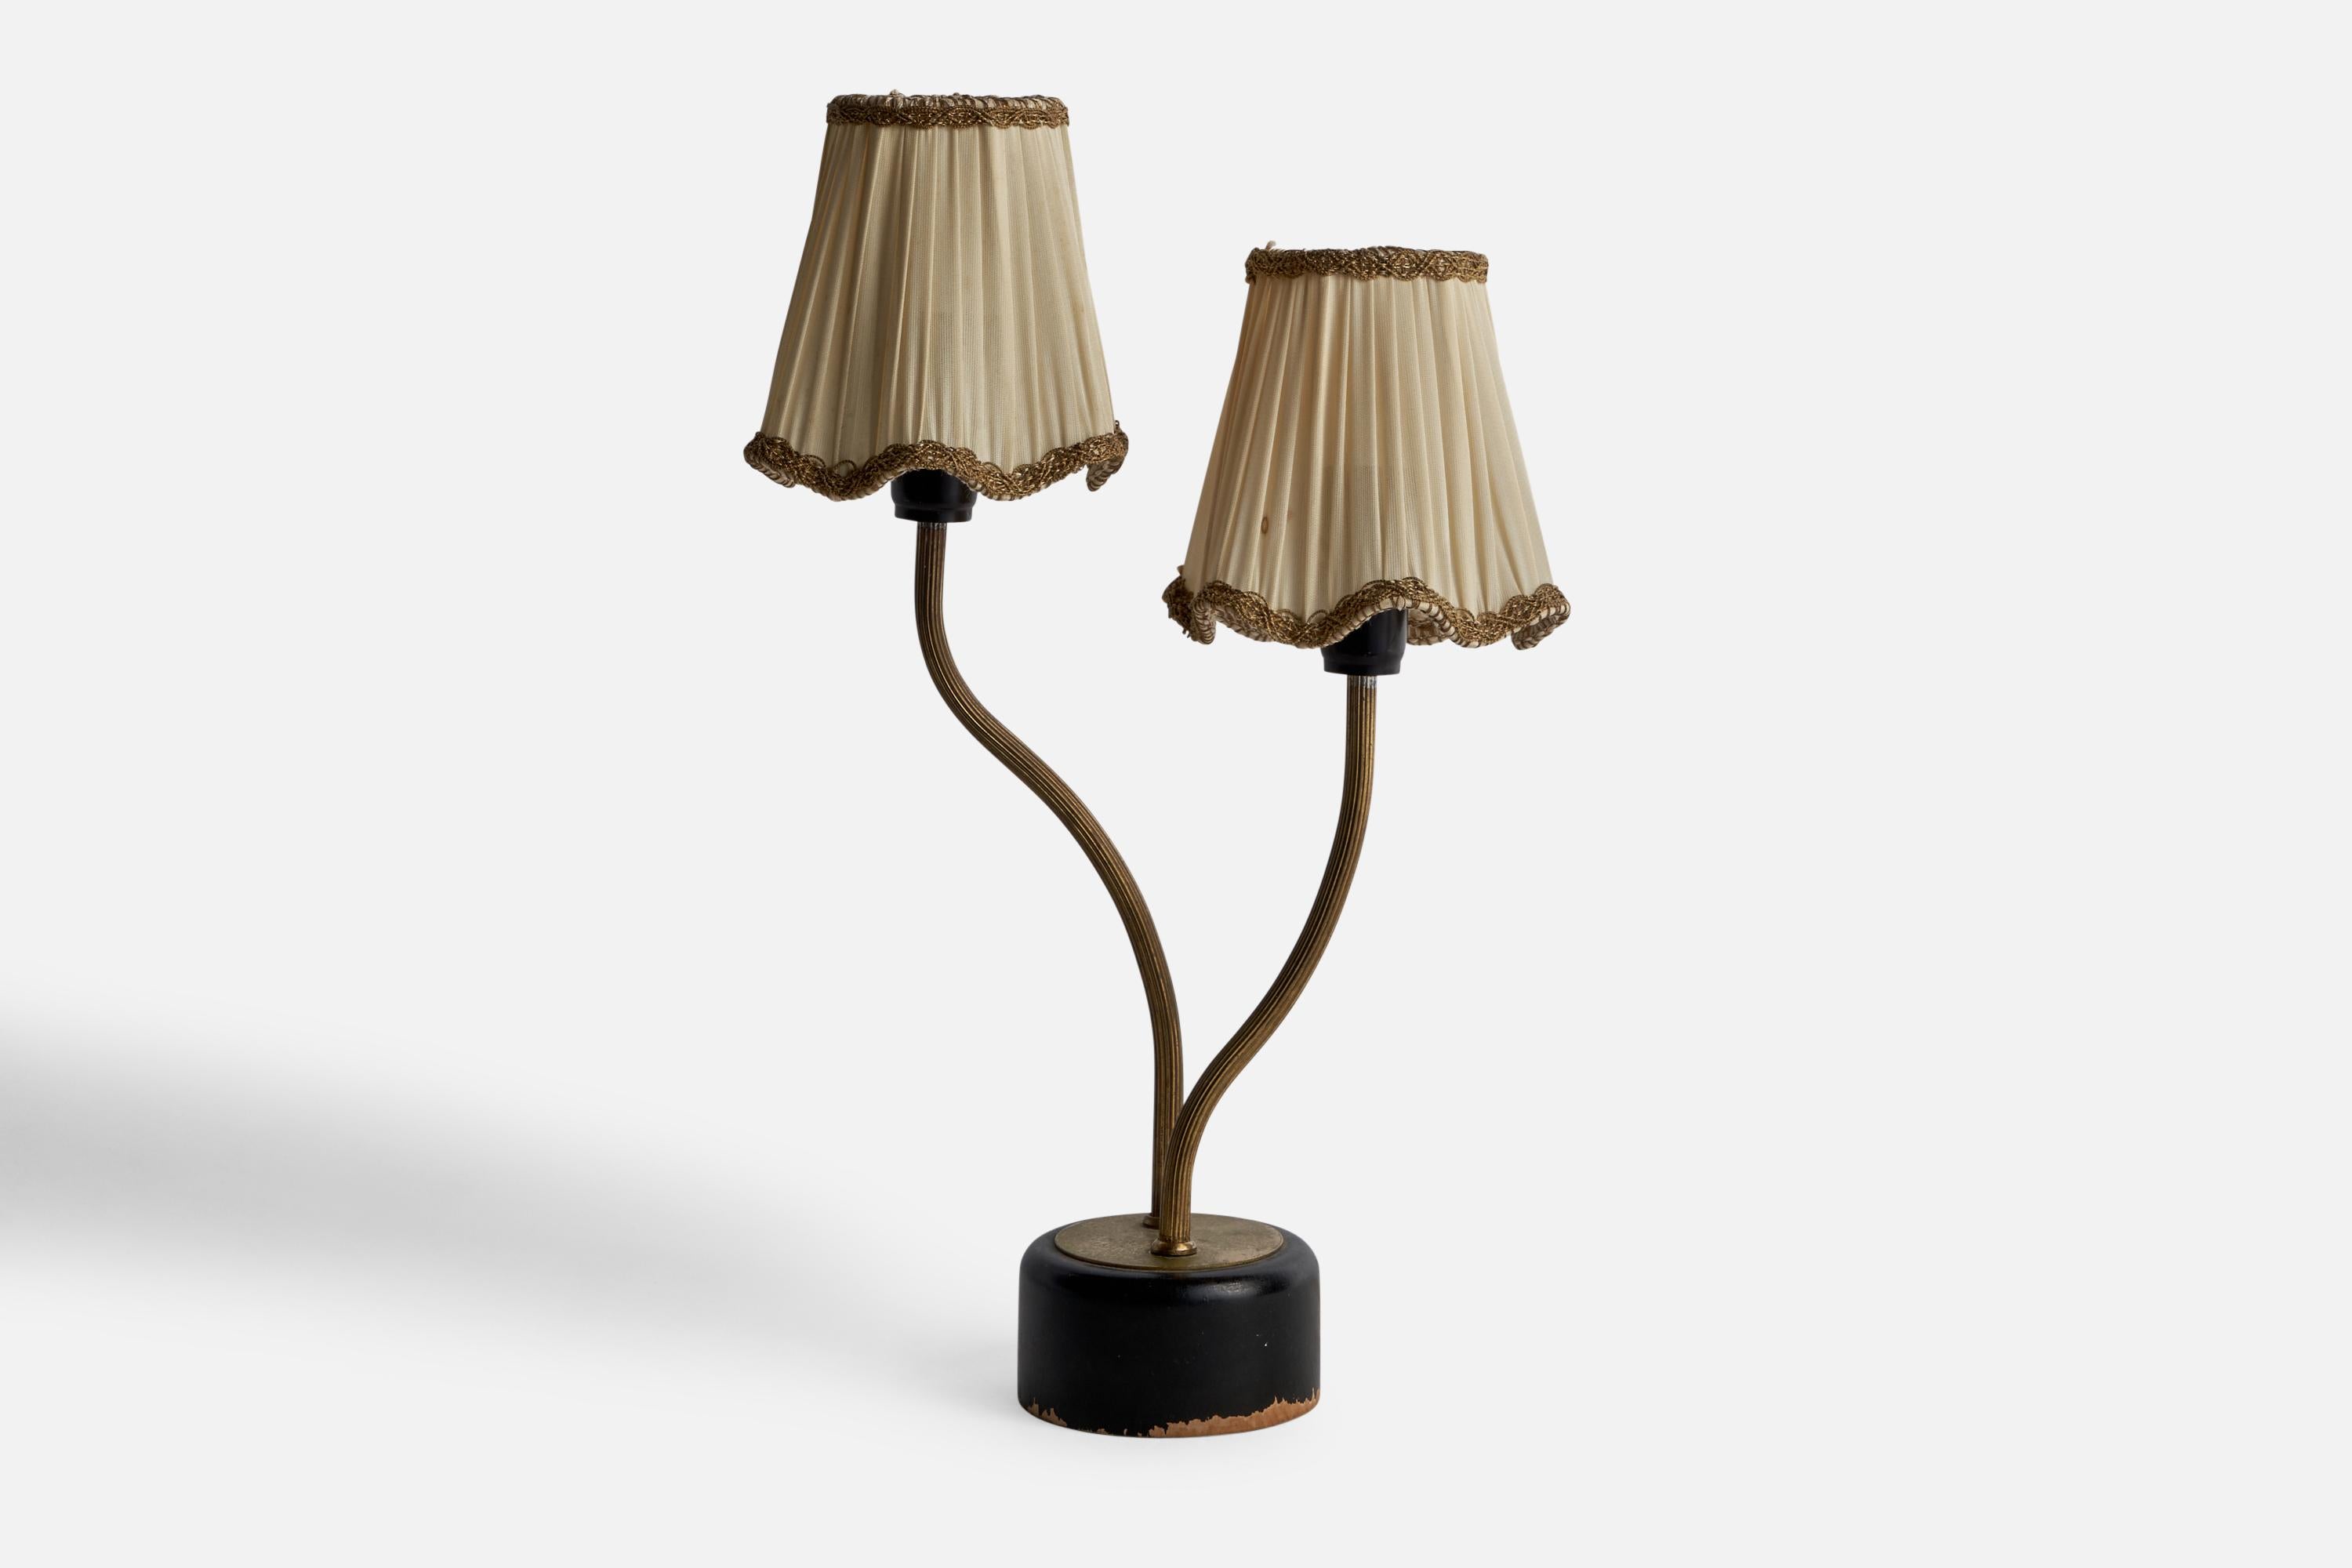 A brass, black-painted wood and beige fabric table lamp designed and produced in Sweden, c. 1940s.

Overall Dimensions (inches): 13.15” H x 8.5” W x 4.2” D
Bulb Specifications: E-14 Bulbs
Number of Sockets: 2
All lighting will be converted for US